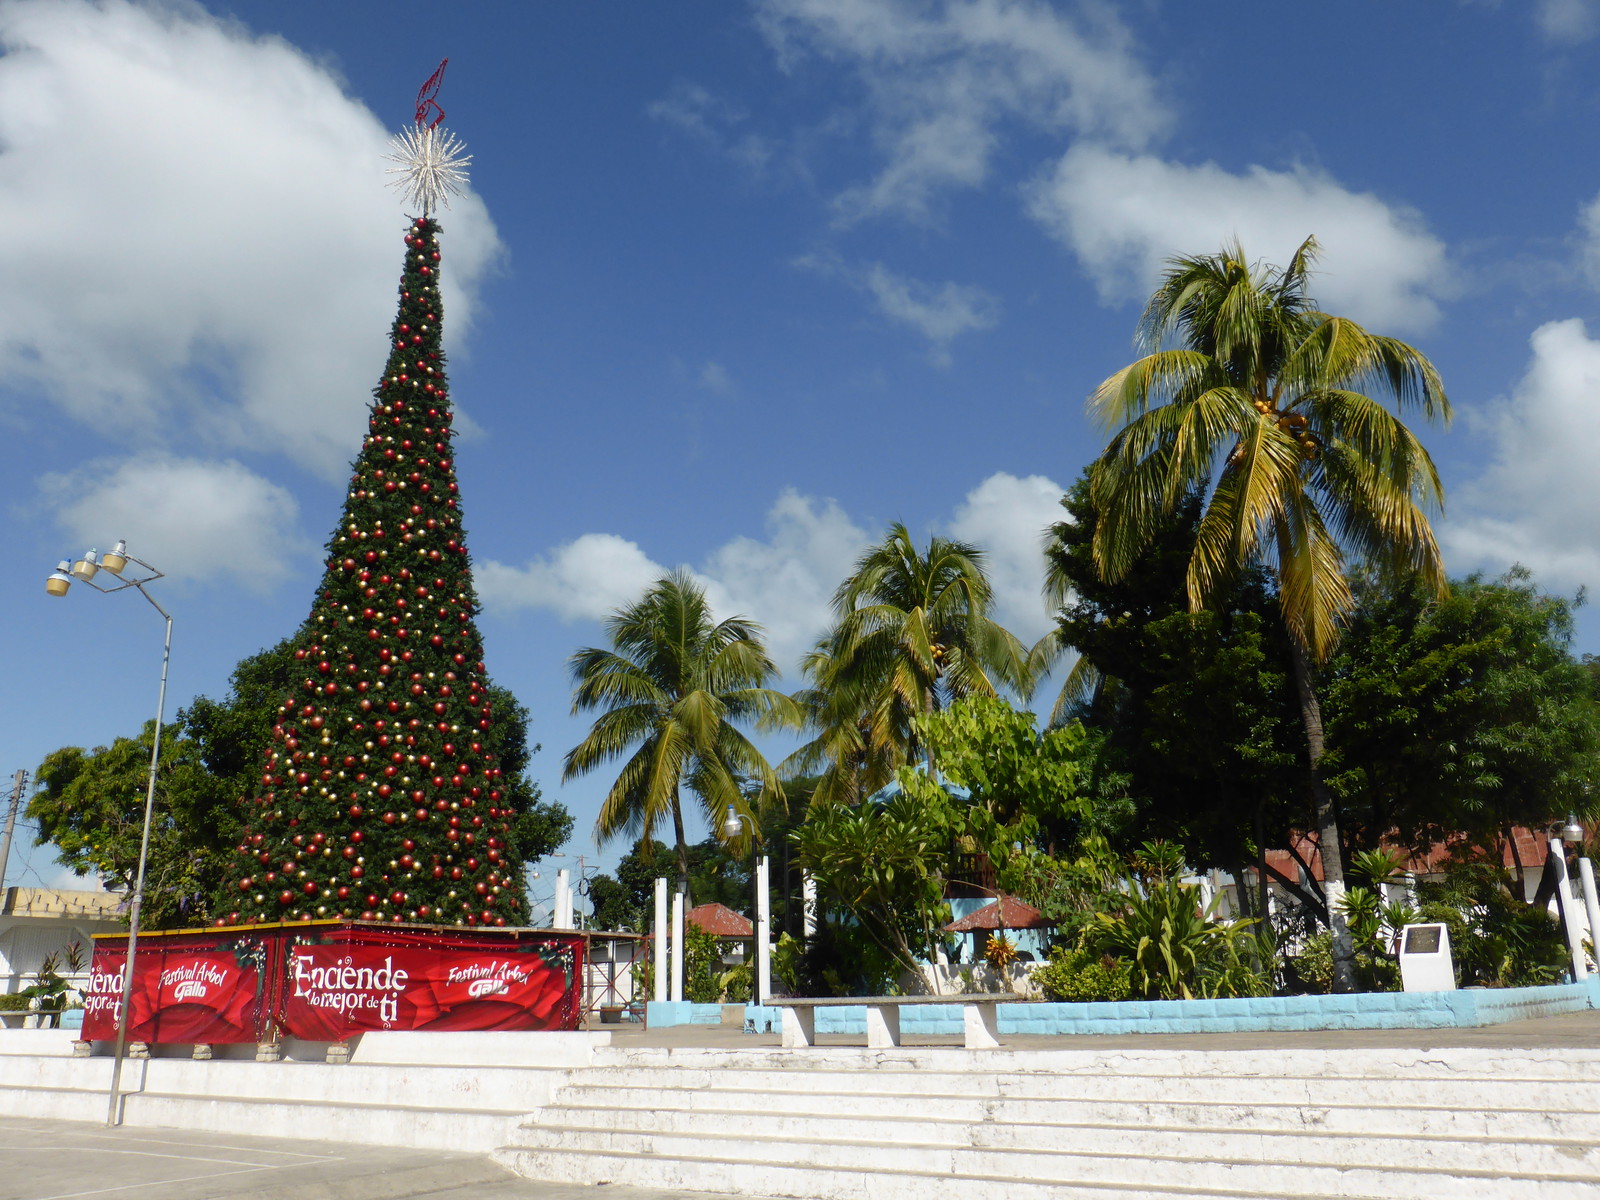 The rather impressive Christmas tree in the main plaza